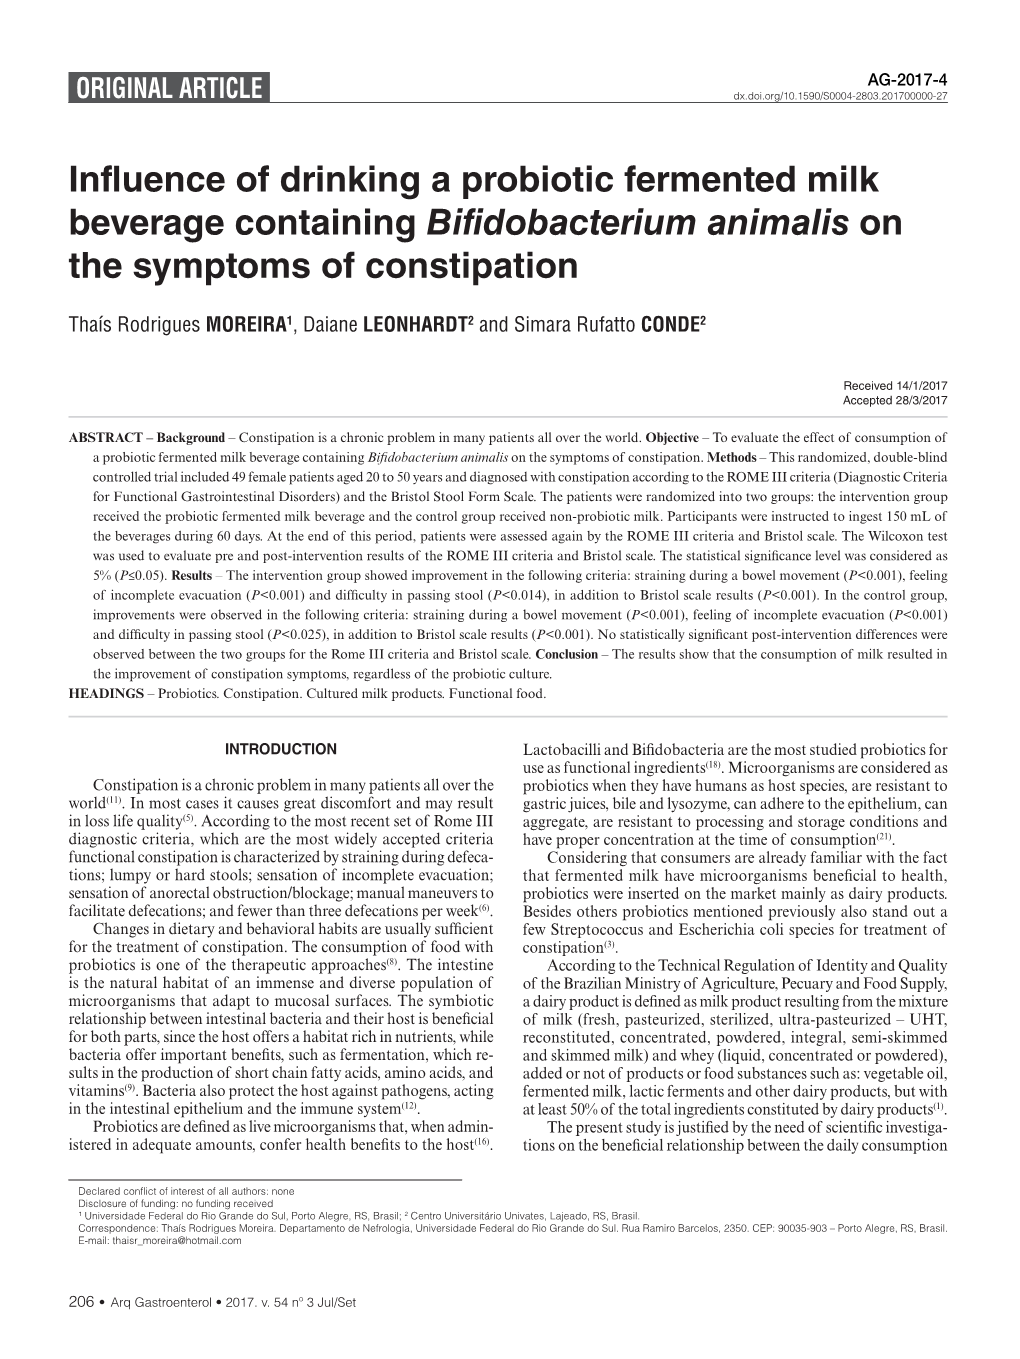 Influence of Drinking a Probiotic Fermented Milk Beverage Containing Bifidobacterium Animalis on the Symptoms of Constipation